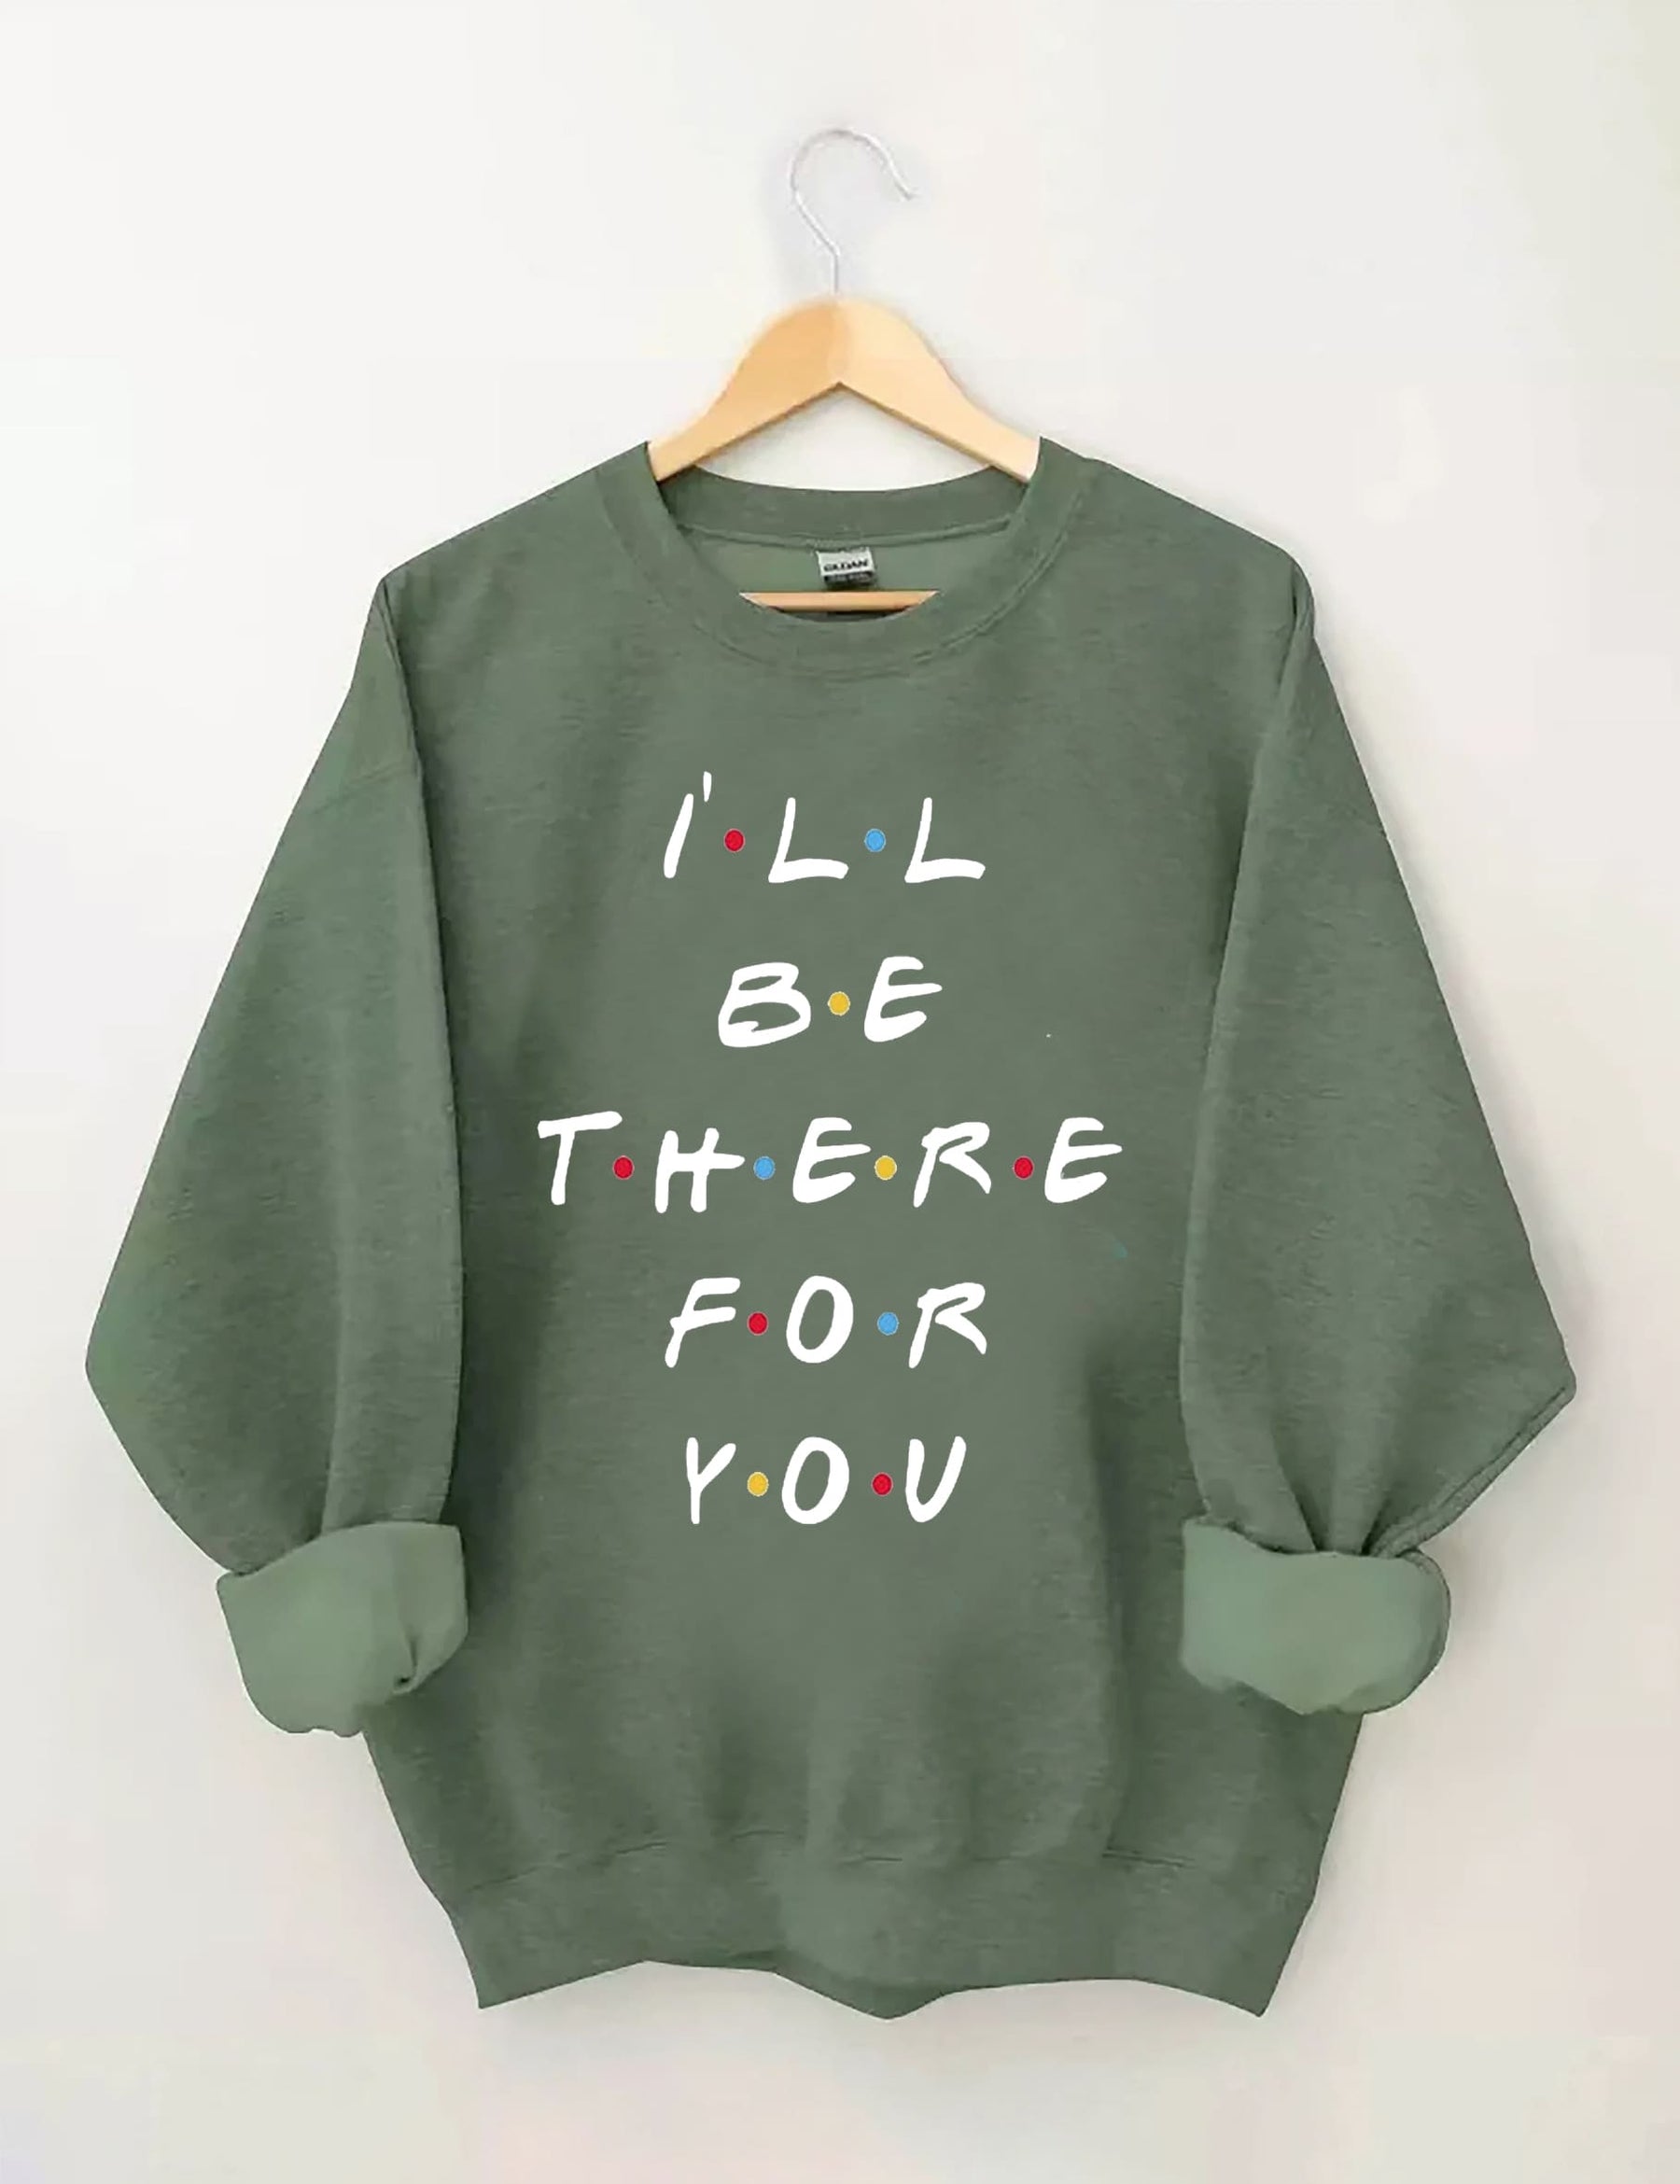 I‘ll Be There For You Sweatshirt